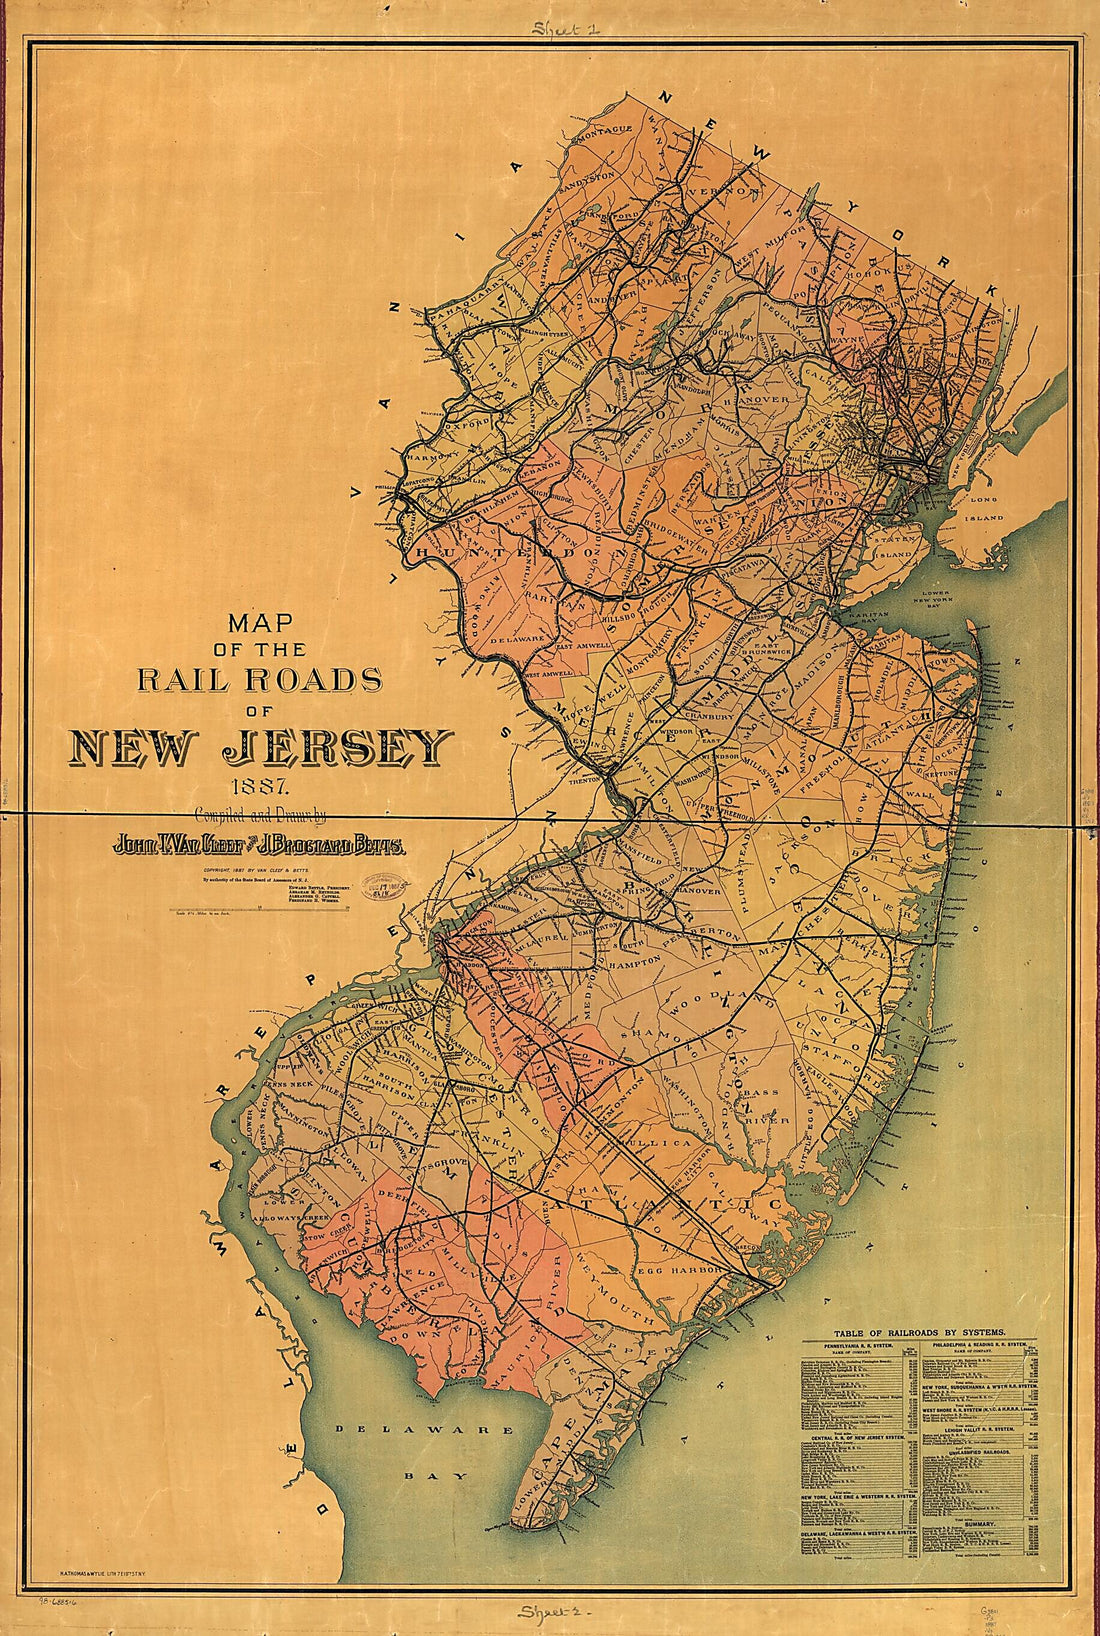 This old map of Map of the Rail Roads of New Jersey from 1887 was created by J. Brognard Betts, John T. Van Cleef in 1887